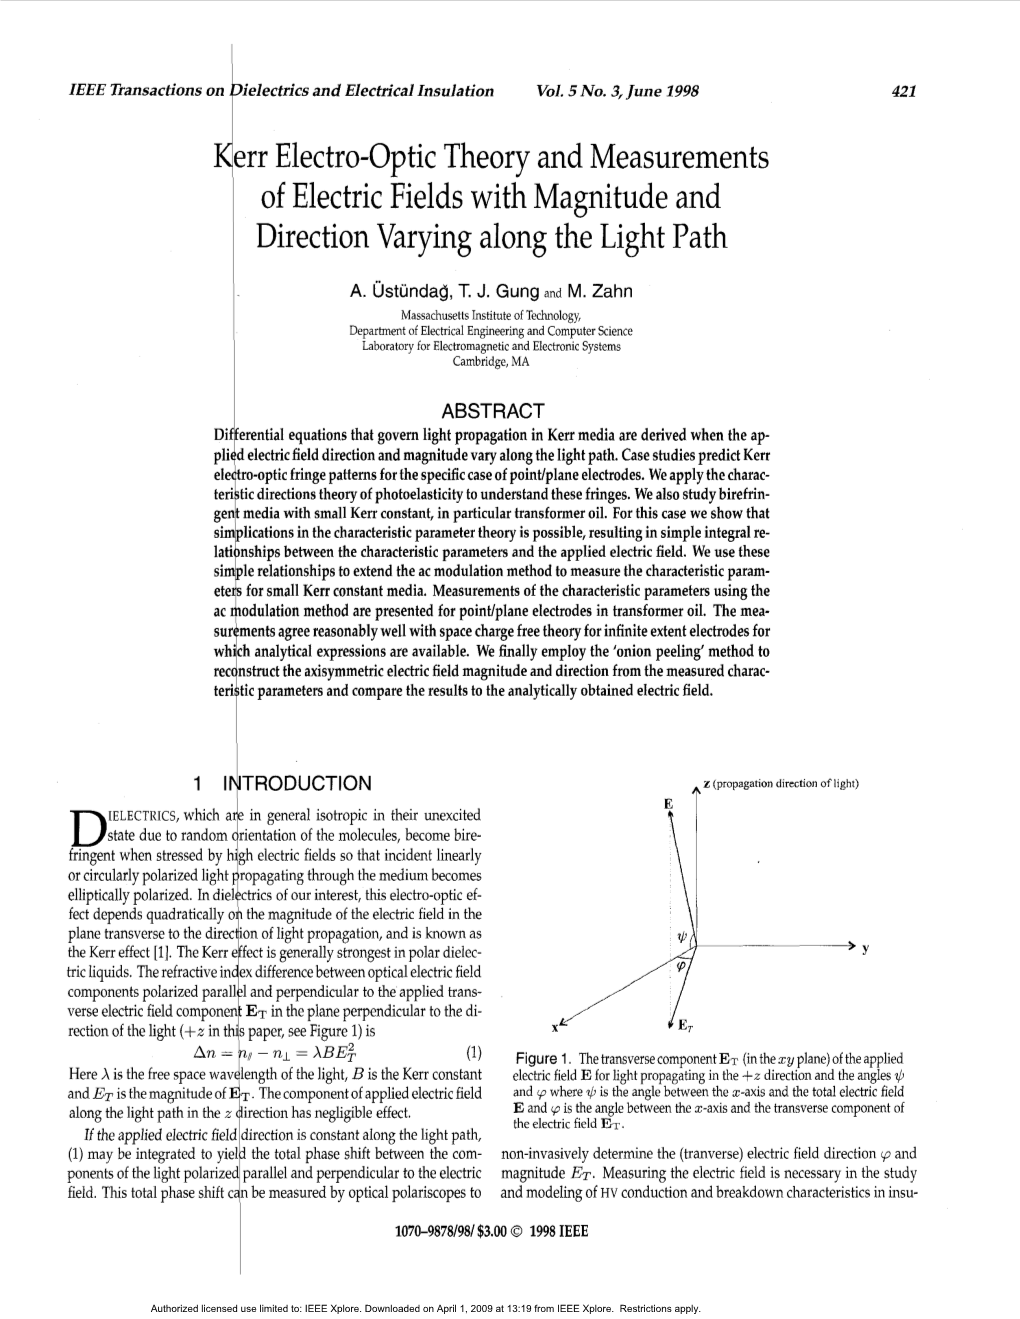 Kerr Electro-Optic Theory and Measurements Of